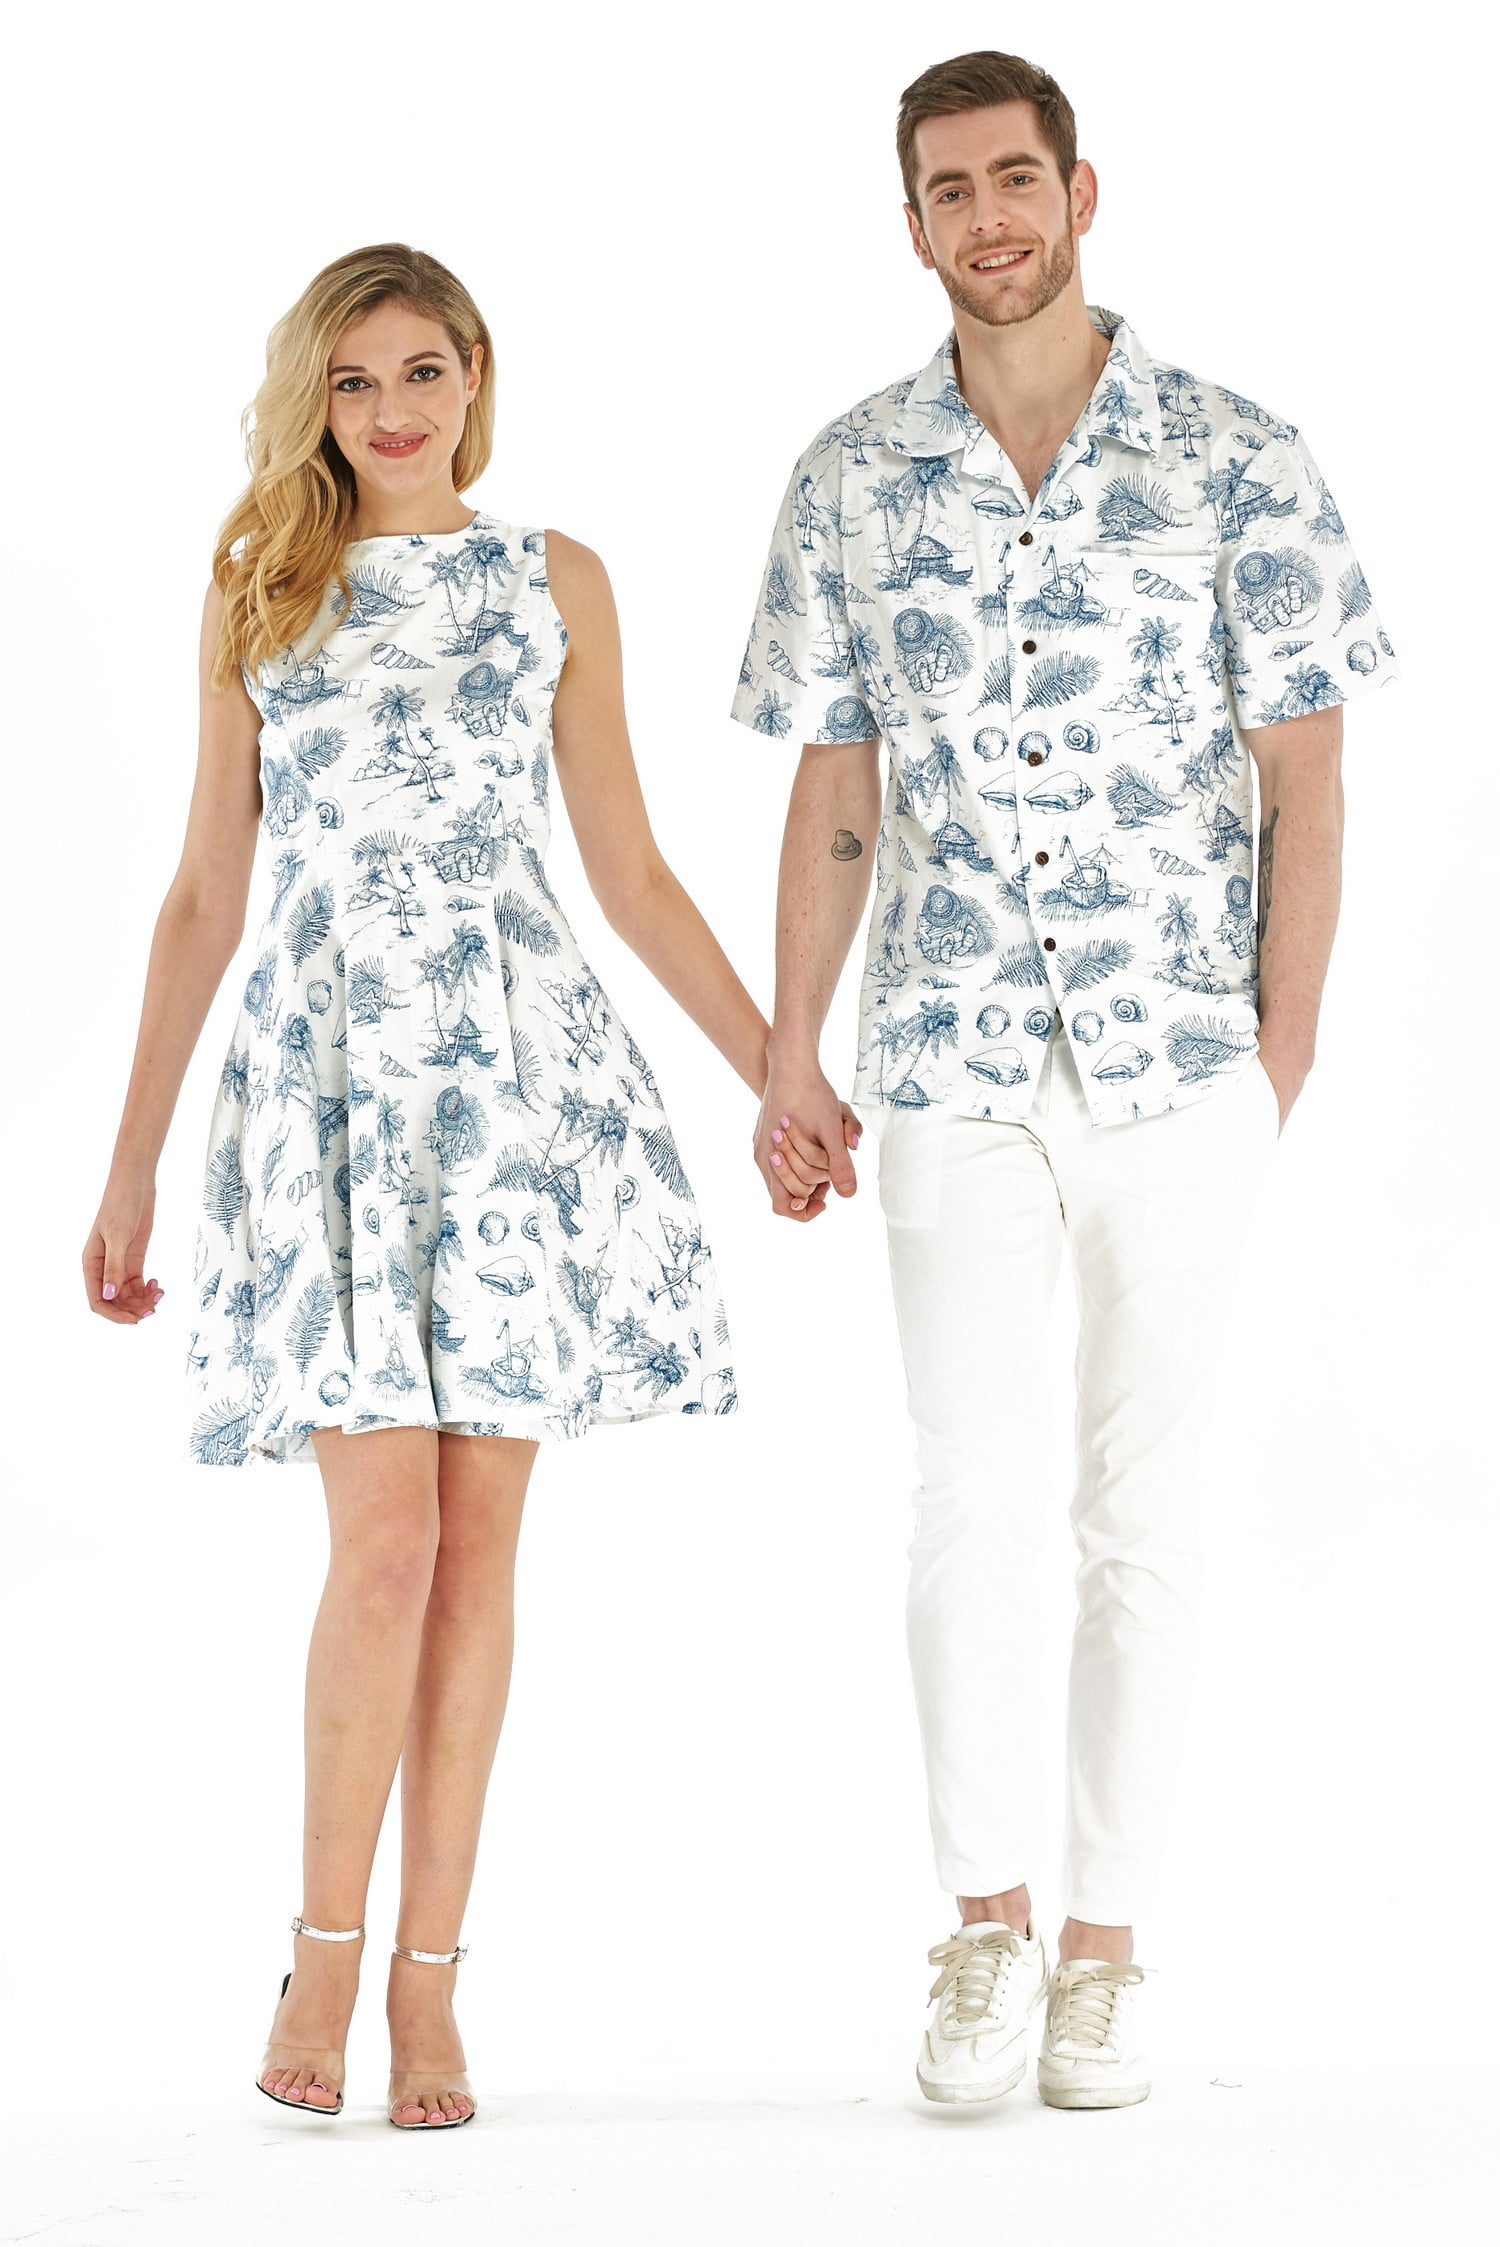 matching tropical outfits for couples